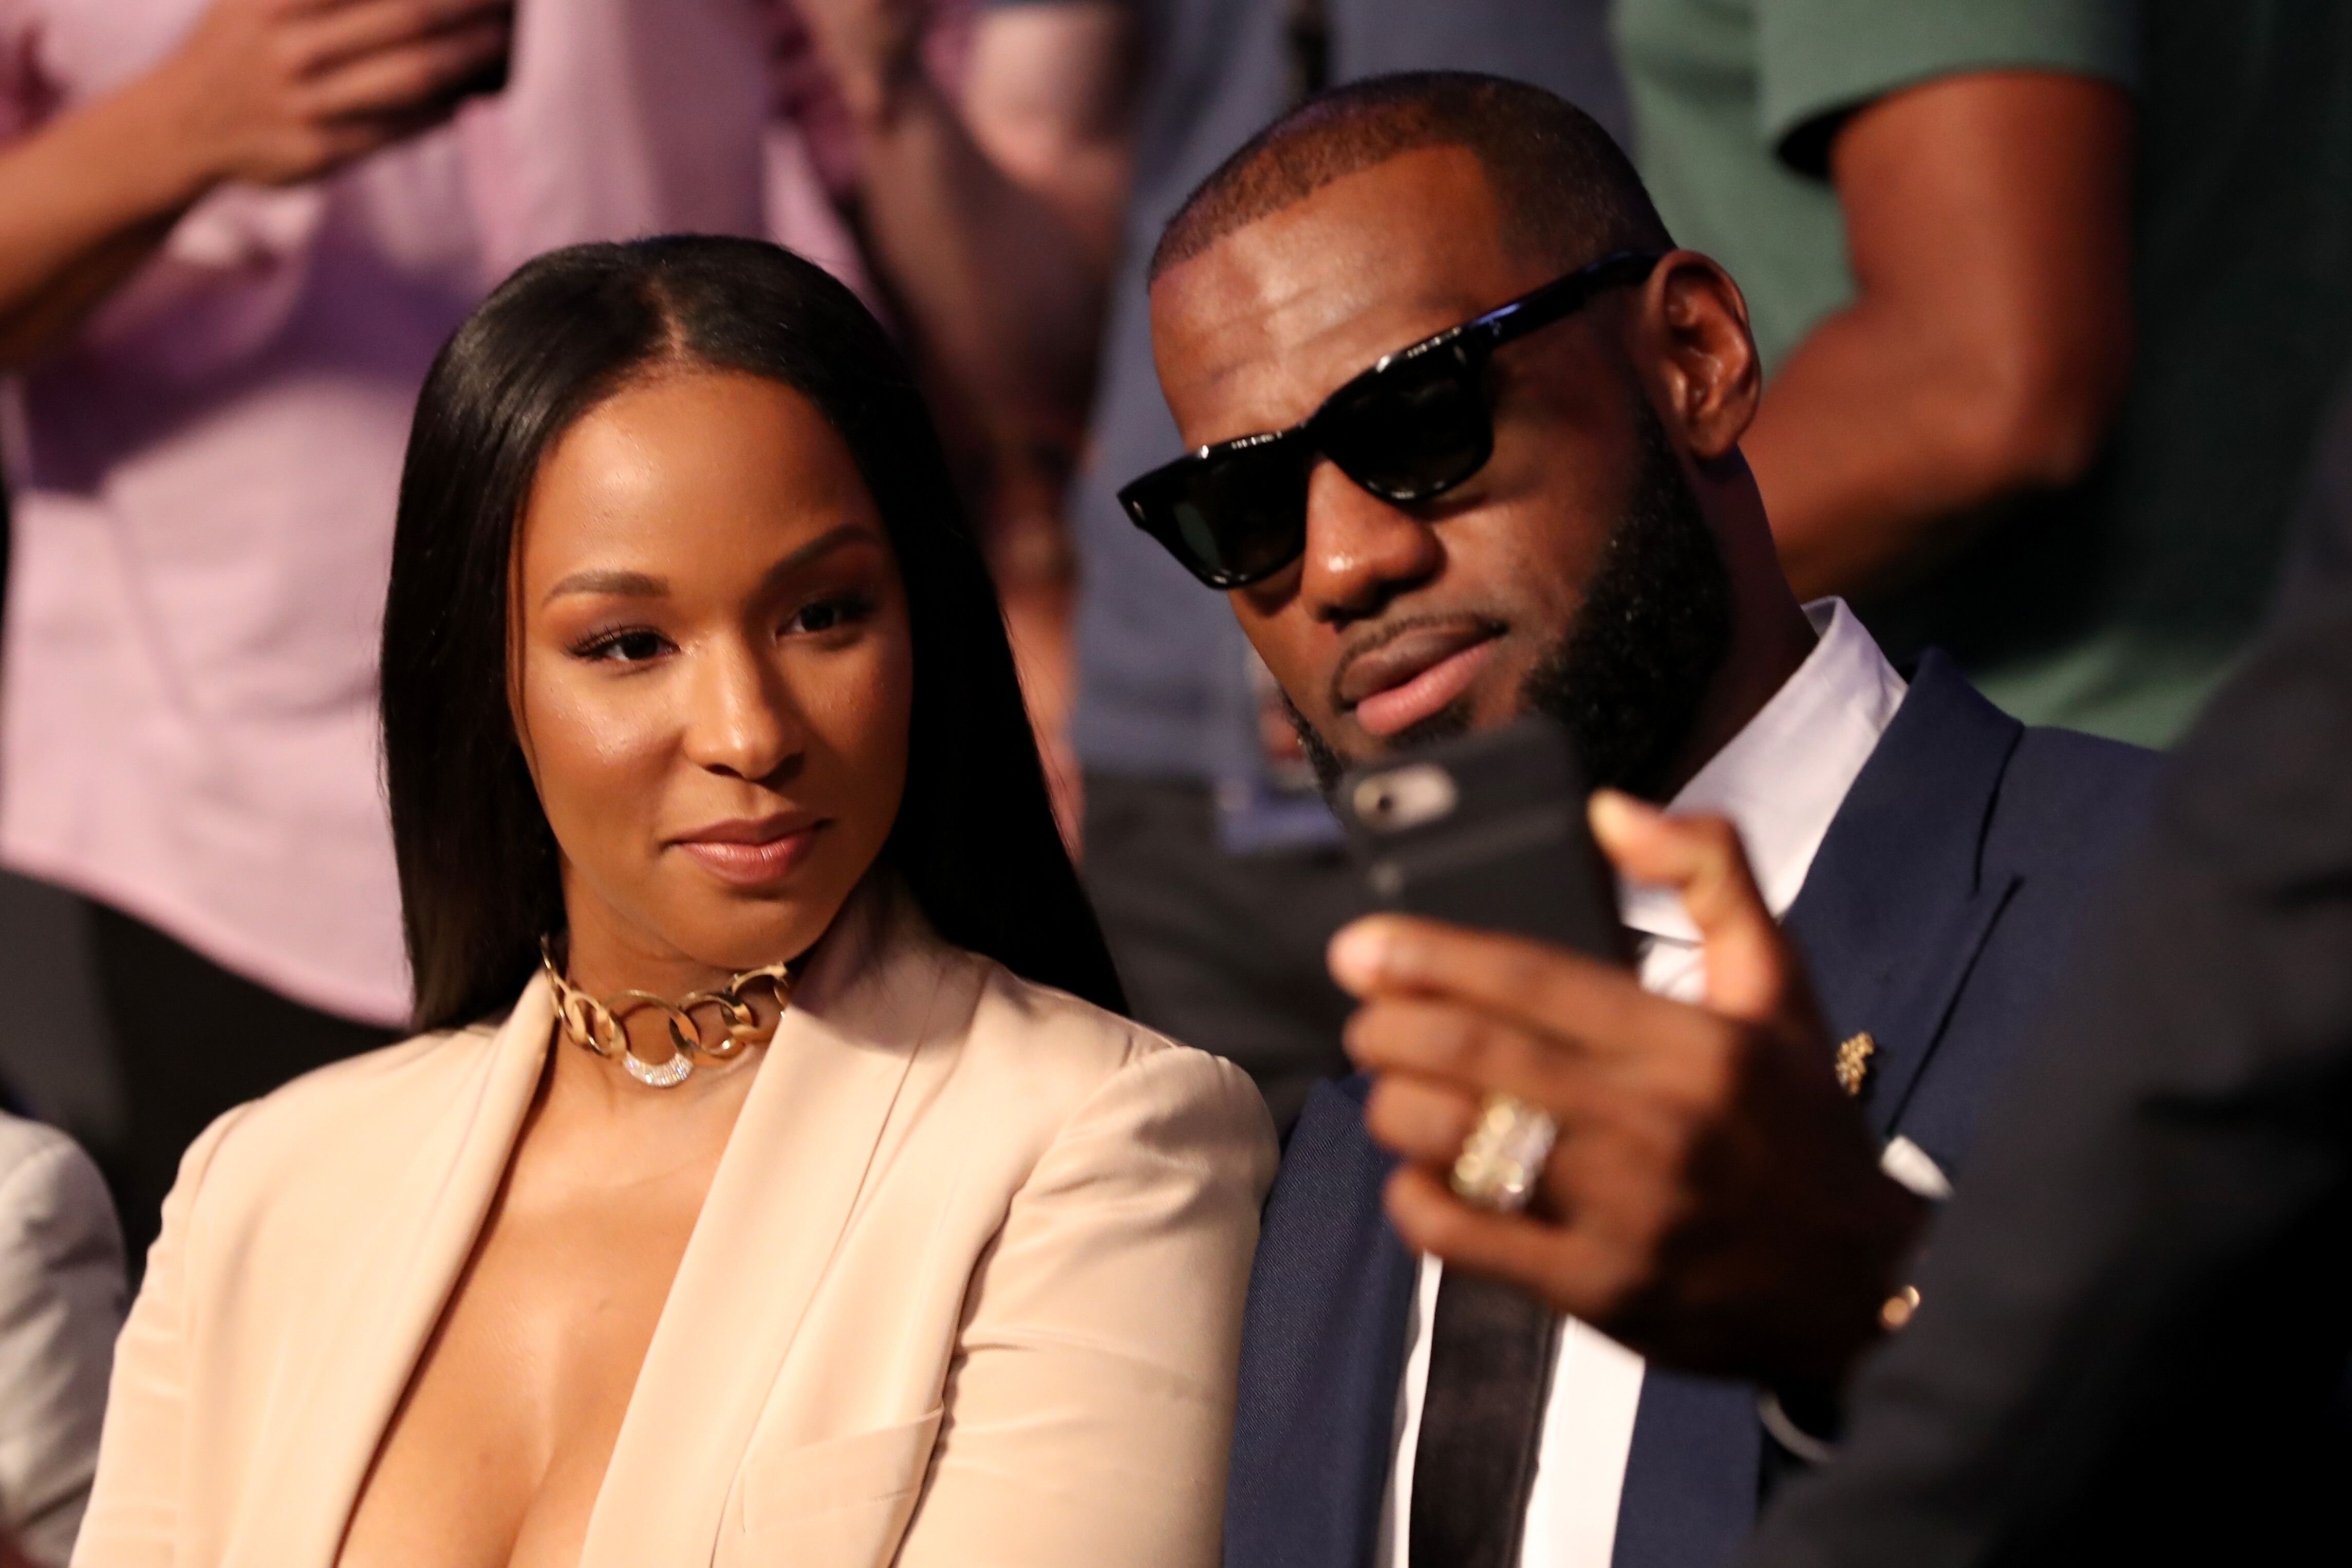 Basketball star LeBron James and his wife Savannah Brinson/ Source: Getty Images